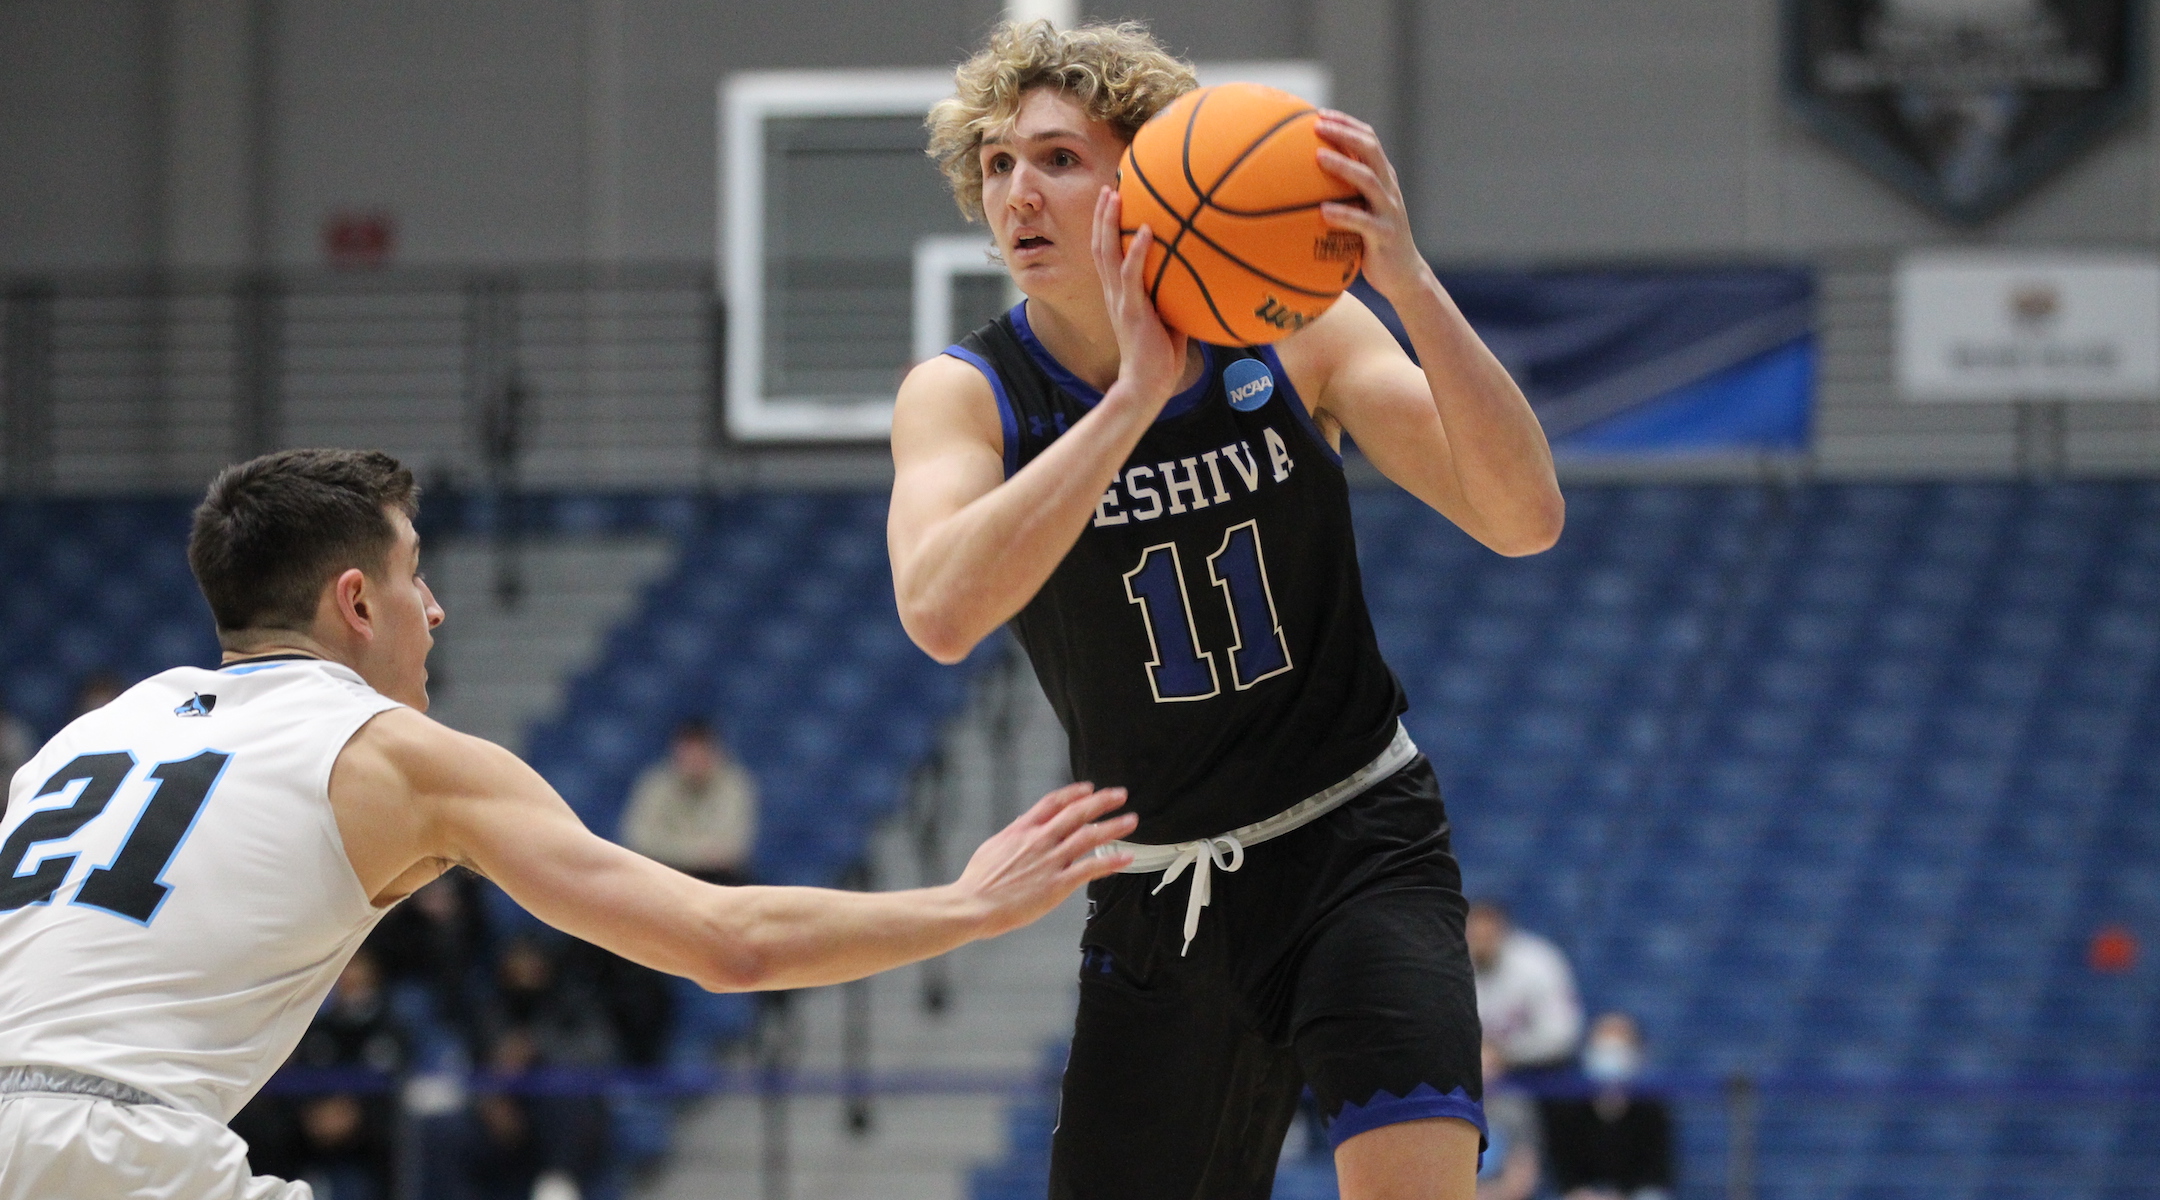  Ryan Turell wasn’t selected in the NBA Draft. Here’s what’s next for the Yeshiva University...